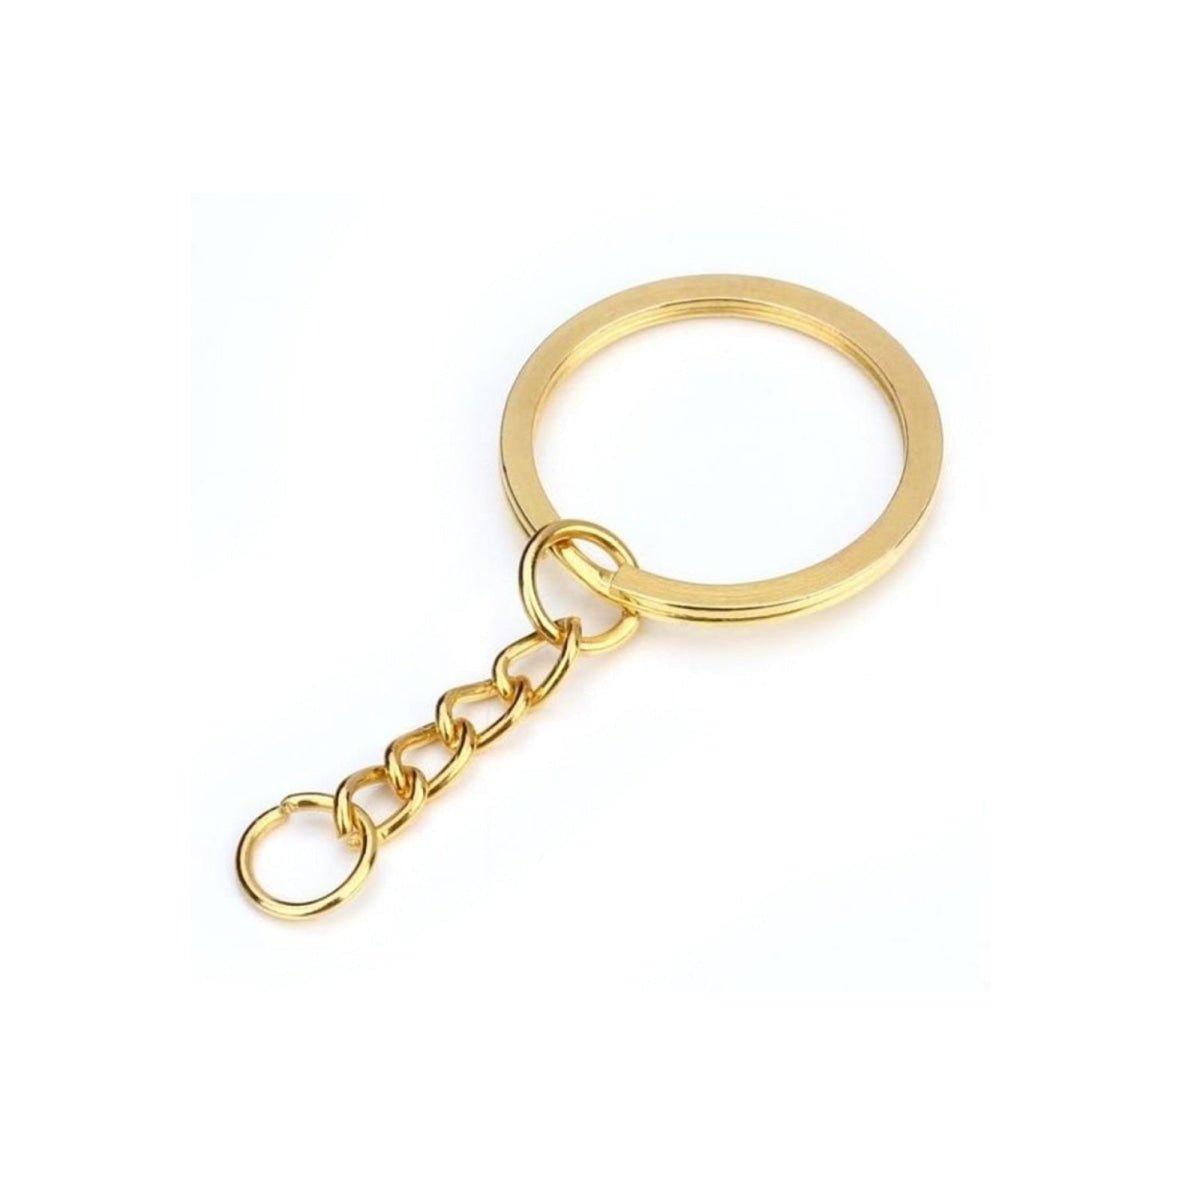 100pcs 28mm Gold Ancient Keyring Keychain Split Ring Chain Key Rings Key Chains - Gold - - Asia Sell